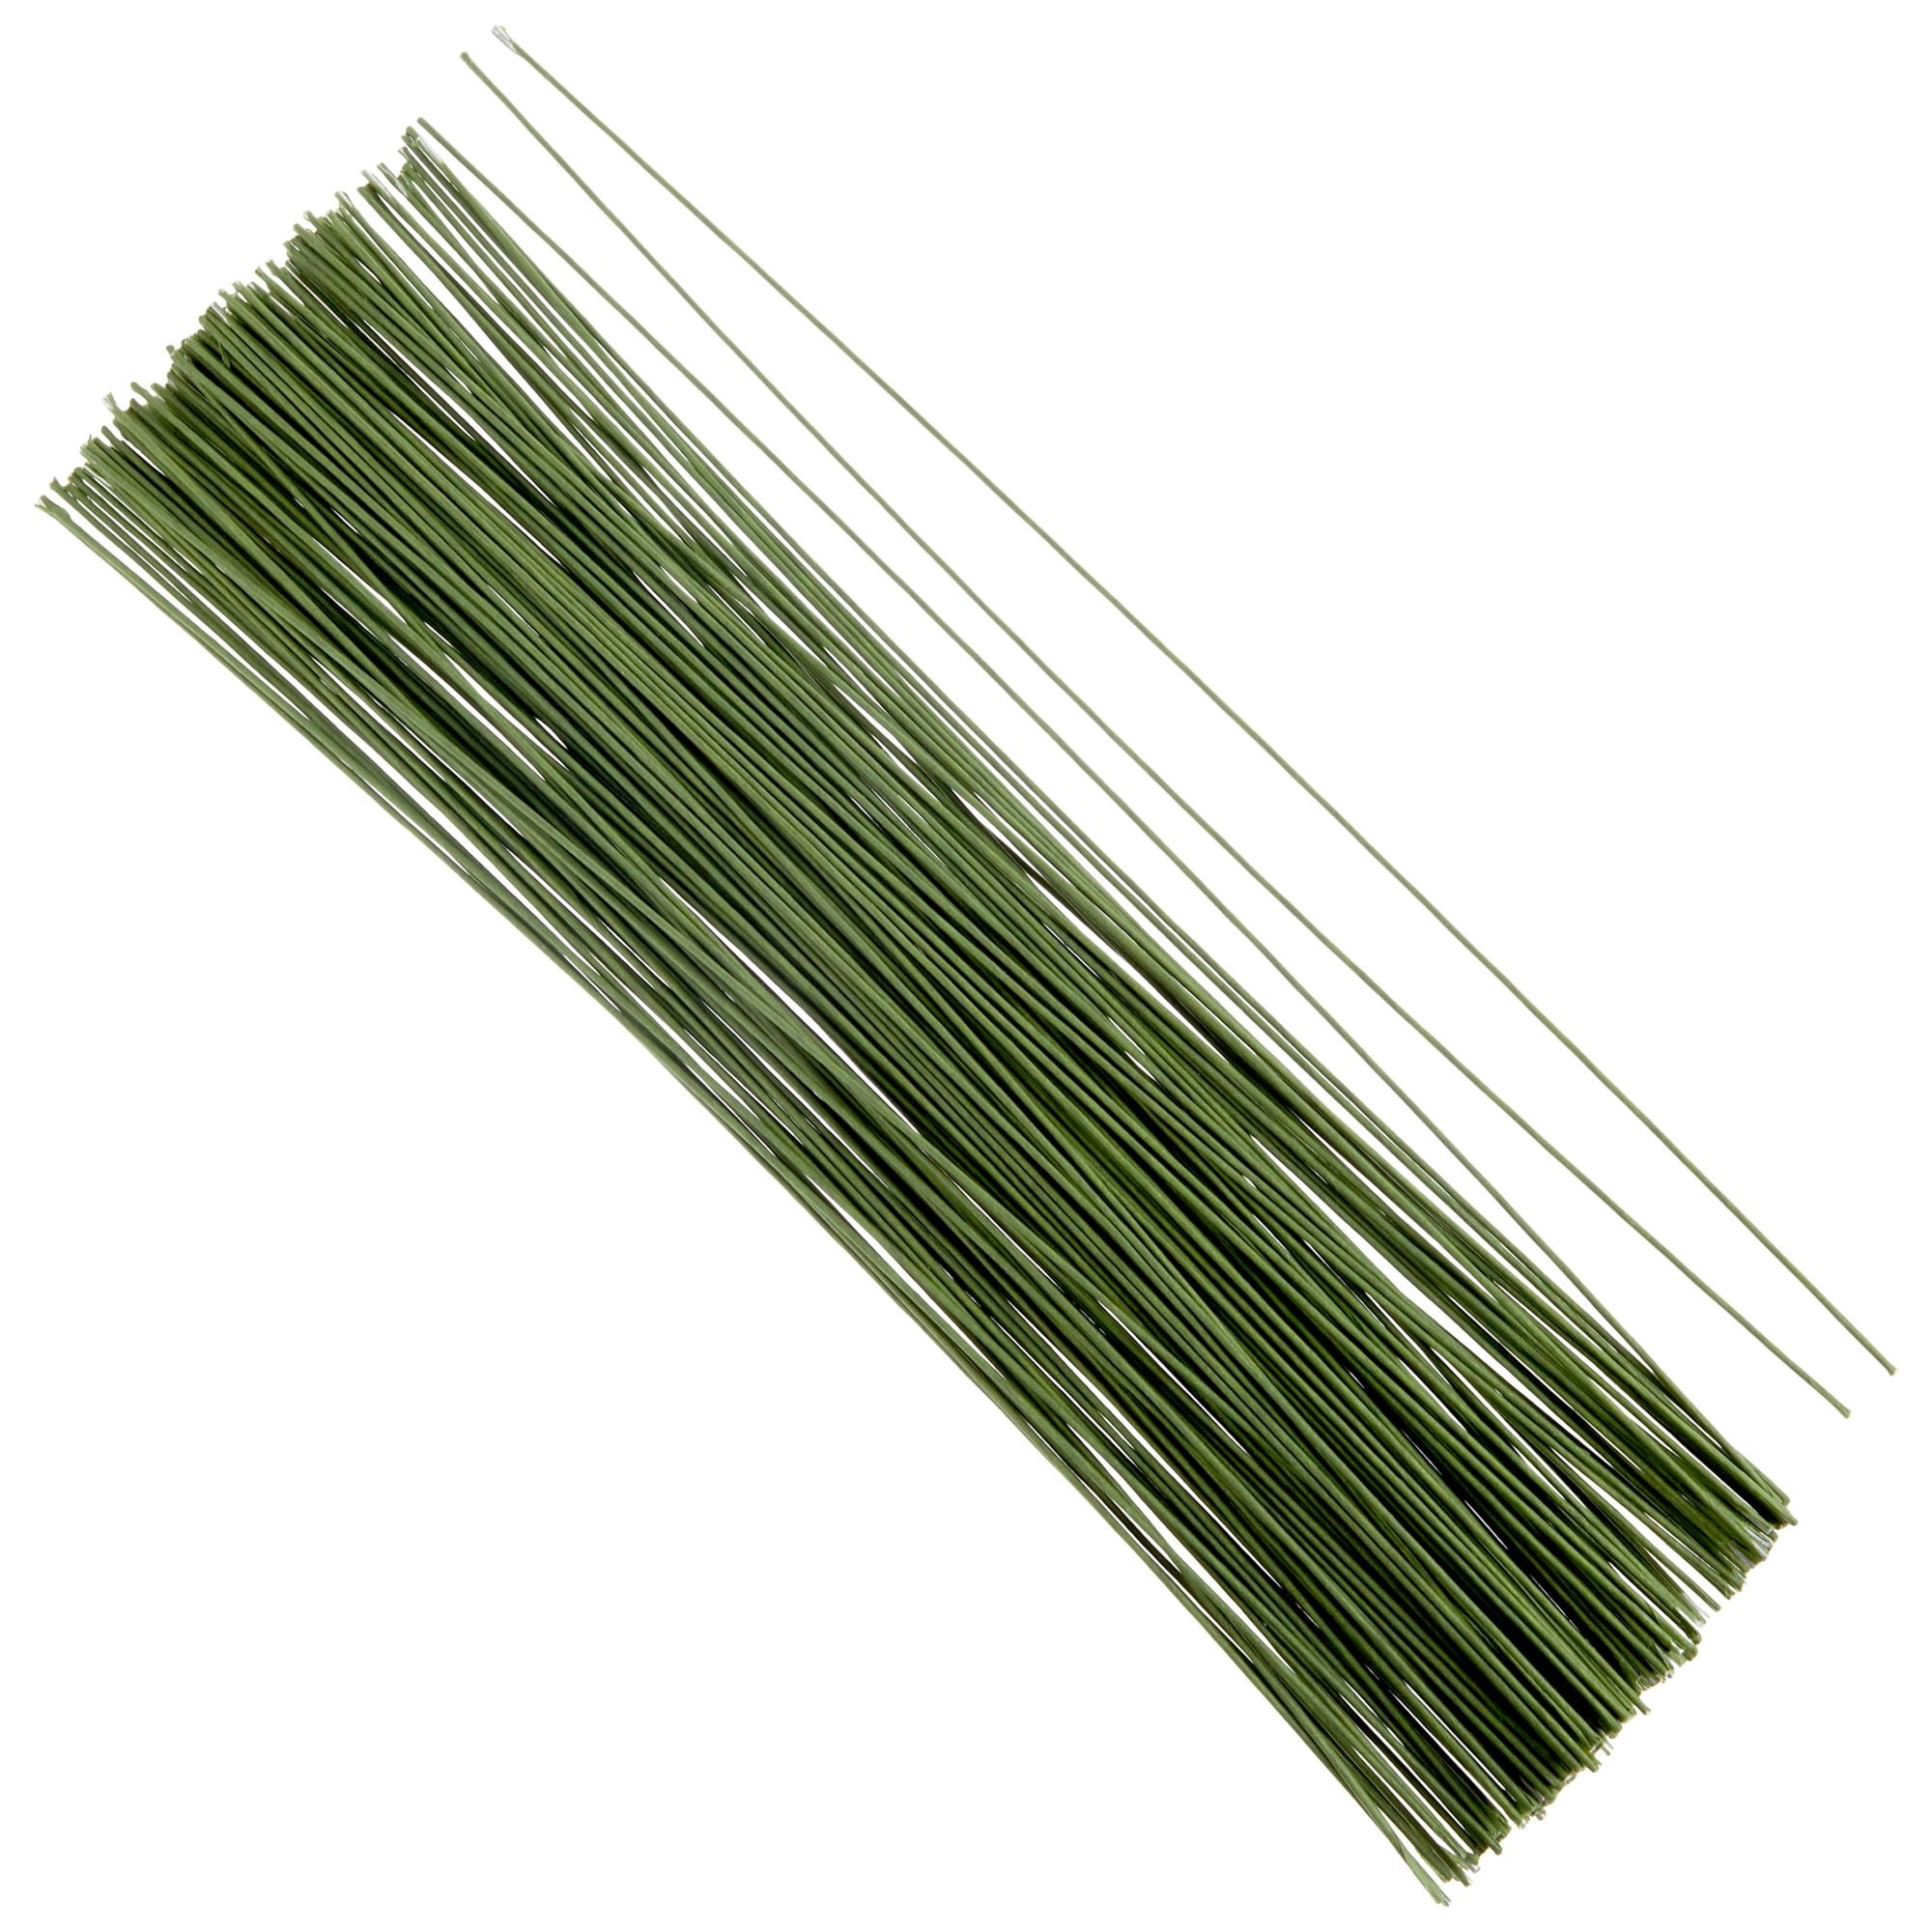 Floral Stem Wire (144 pieces) 18 Gauge, Green - Quick Candles